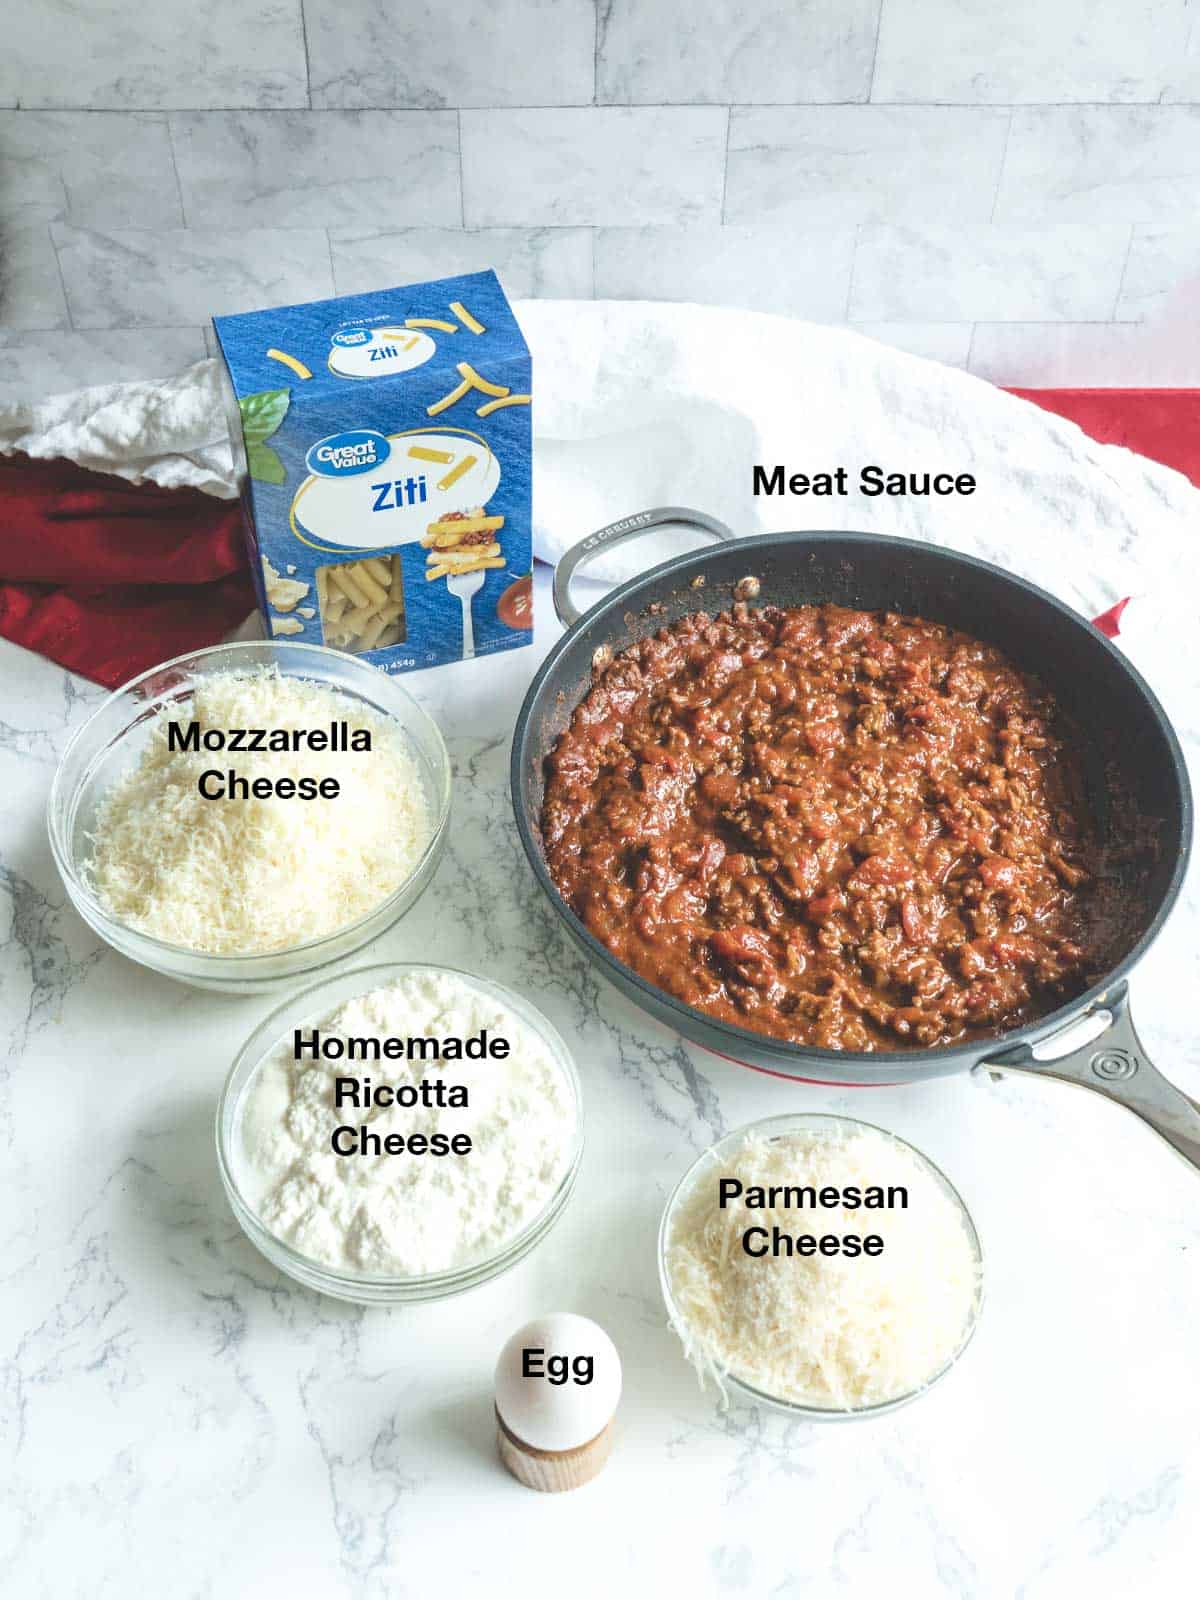 Ingredients for three cheese baked ziti